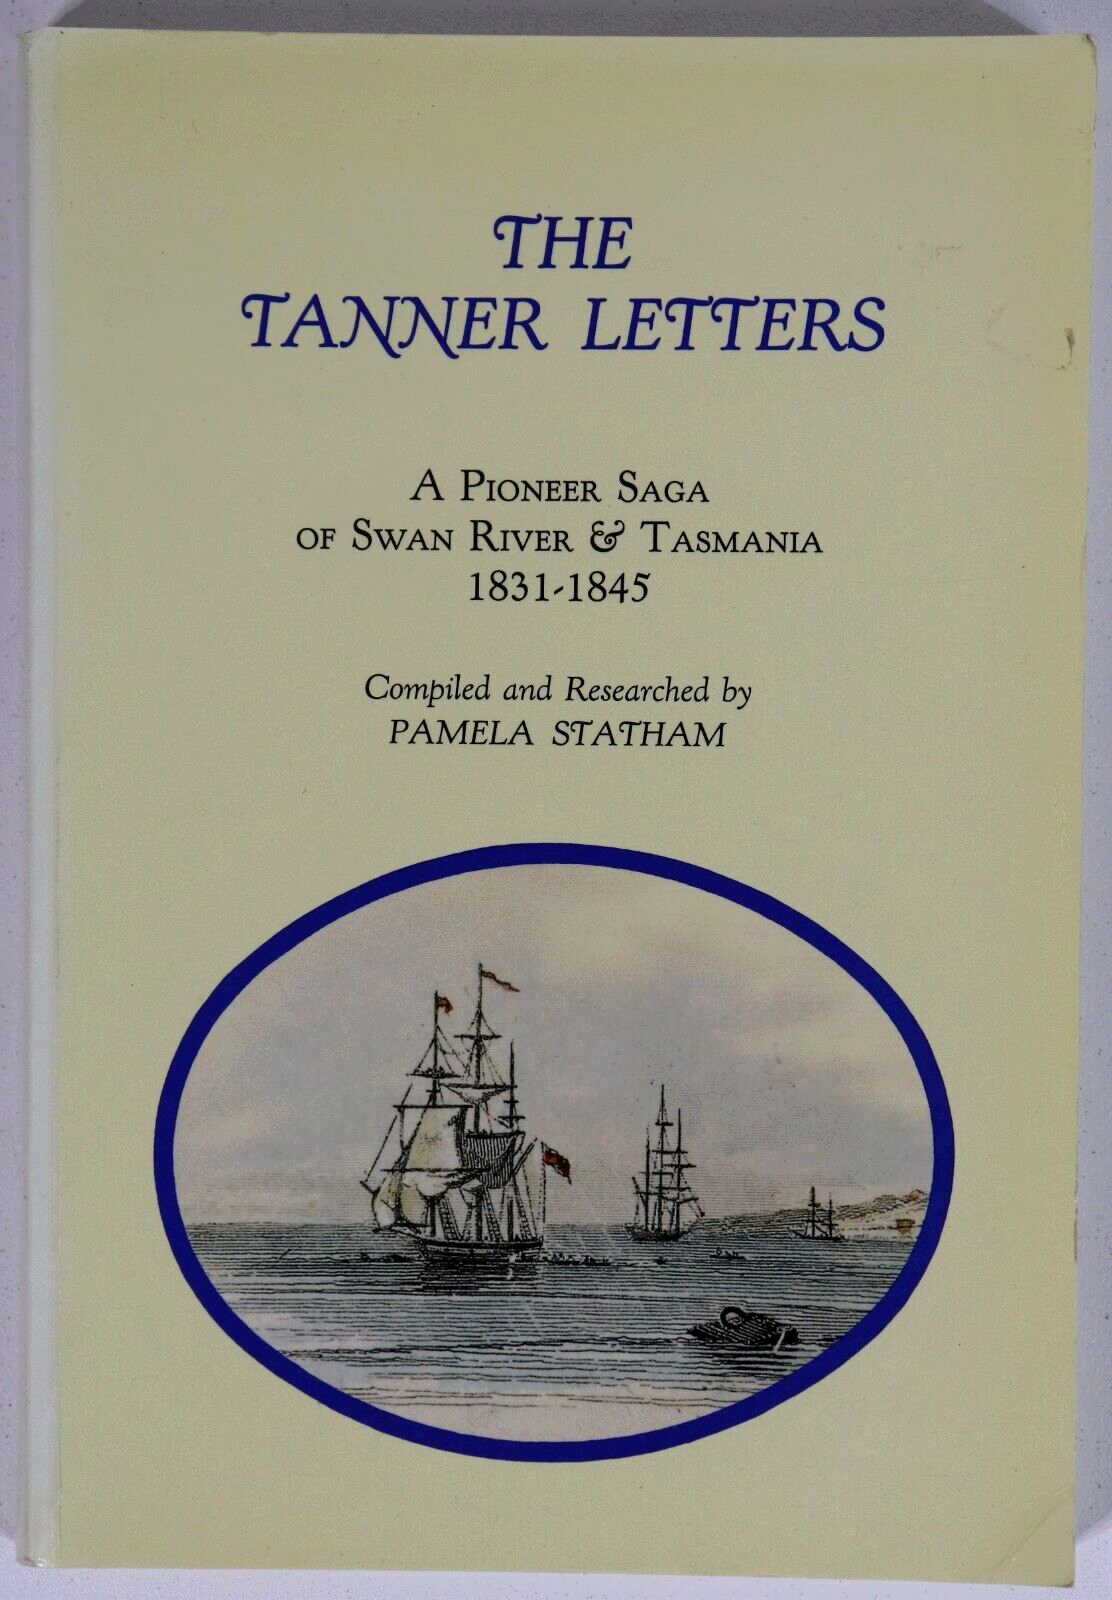 The Tanner Letters by Pamela Statham - 1981 - Australian Colonial History Book